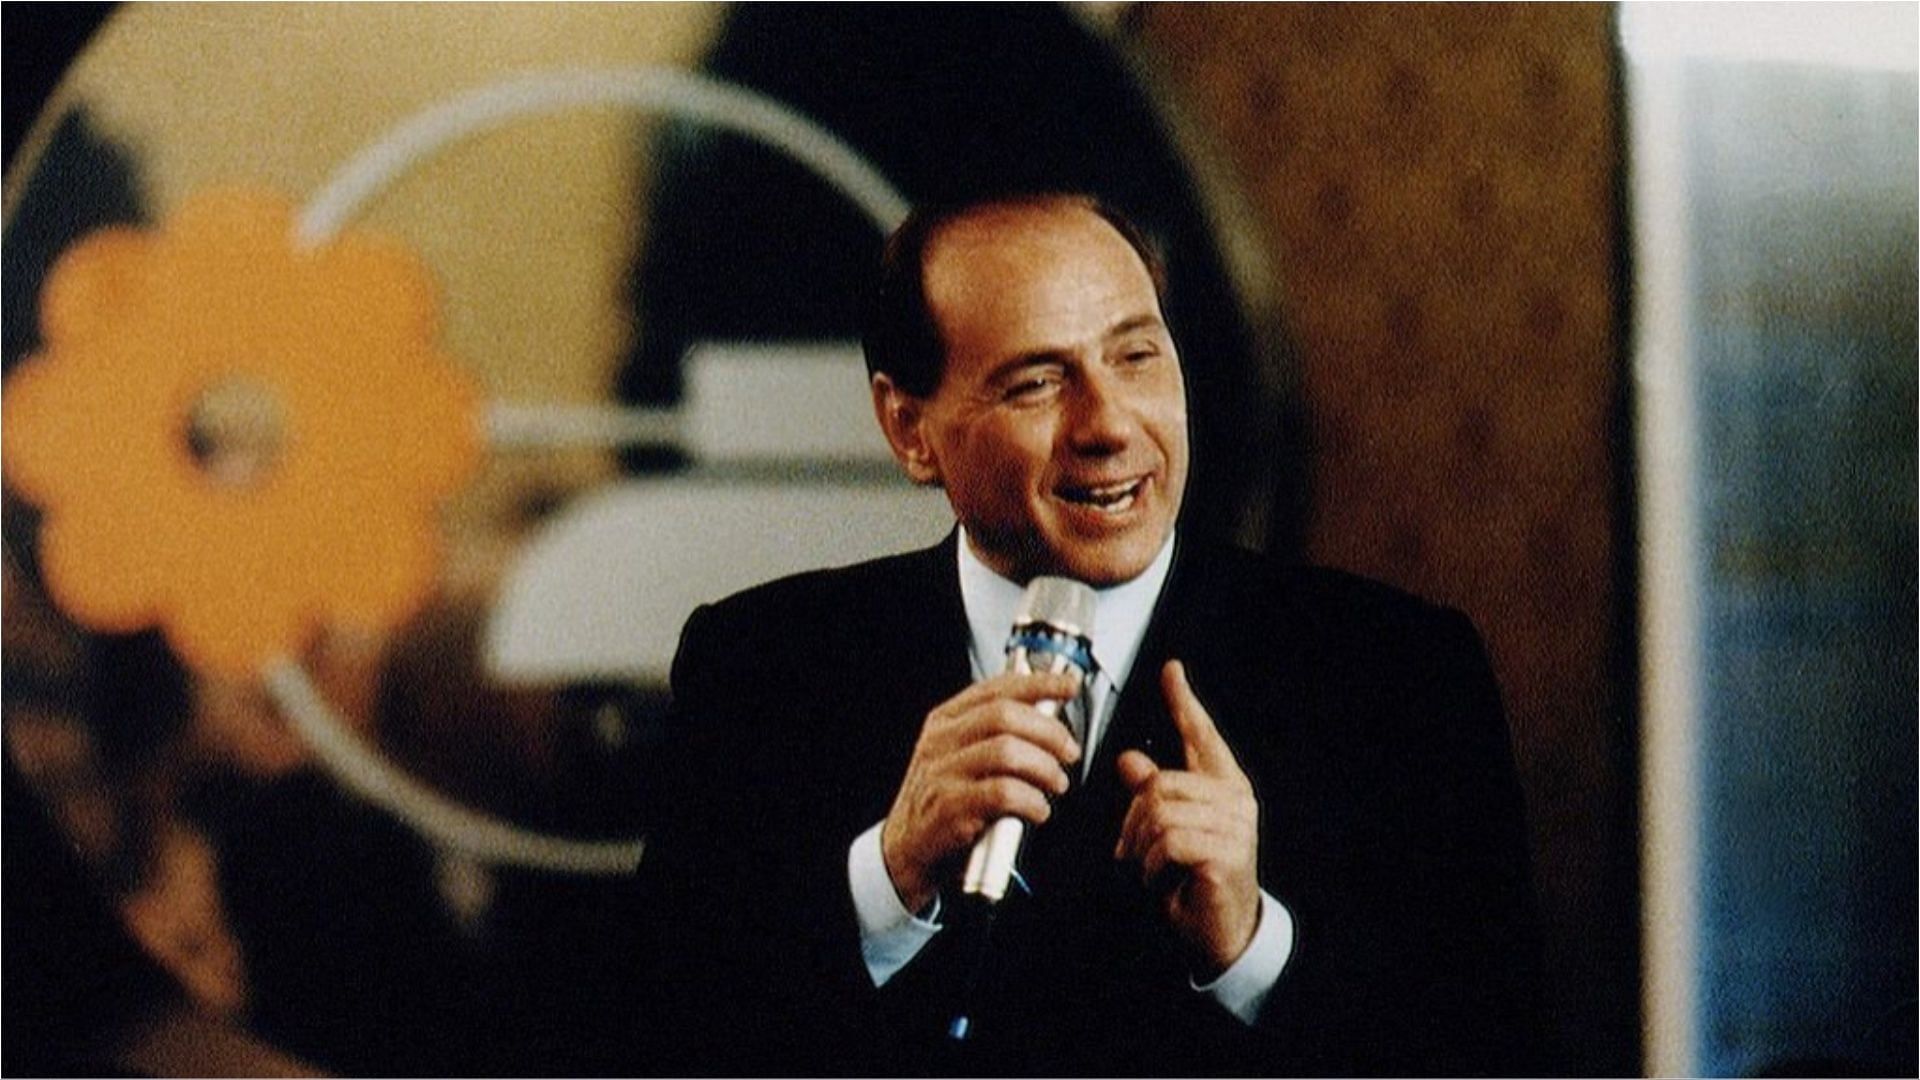 Silvio Berlusconi served as the Prime Minister of Italy in the past (Image via Franco Origlia/Getty Images)